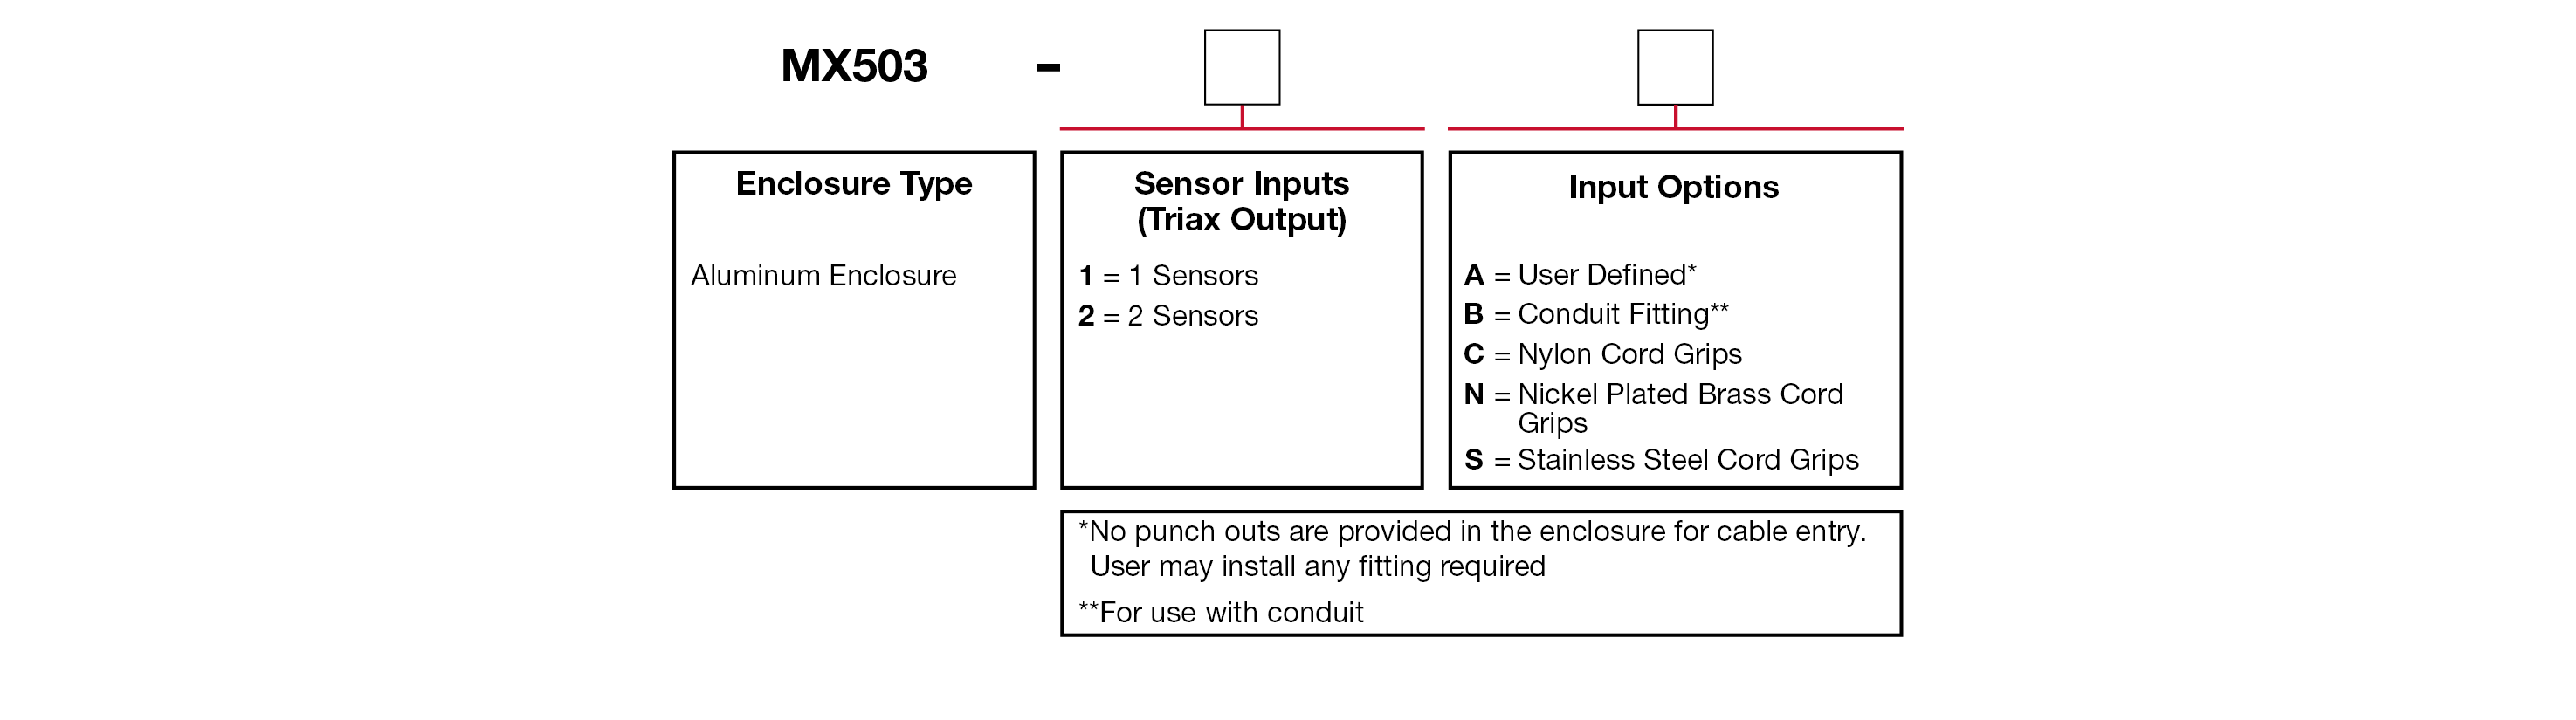 A chart showing configuration options to create a complete part number for ordering a CTC MX503 enclosure.